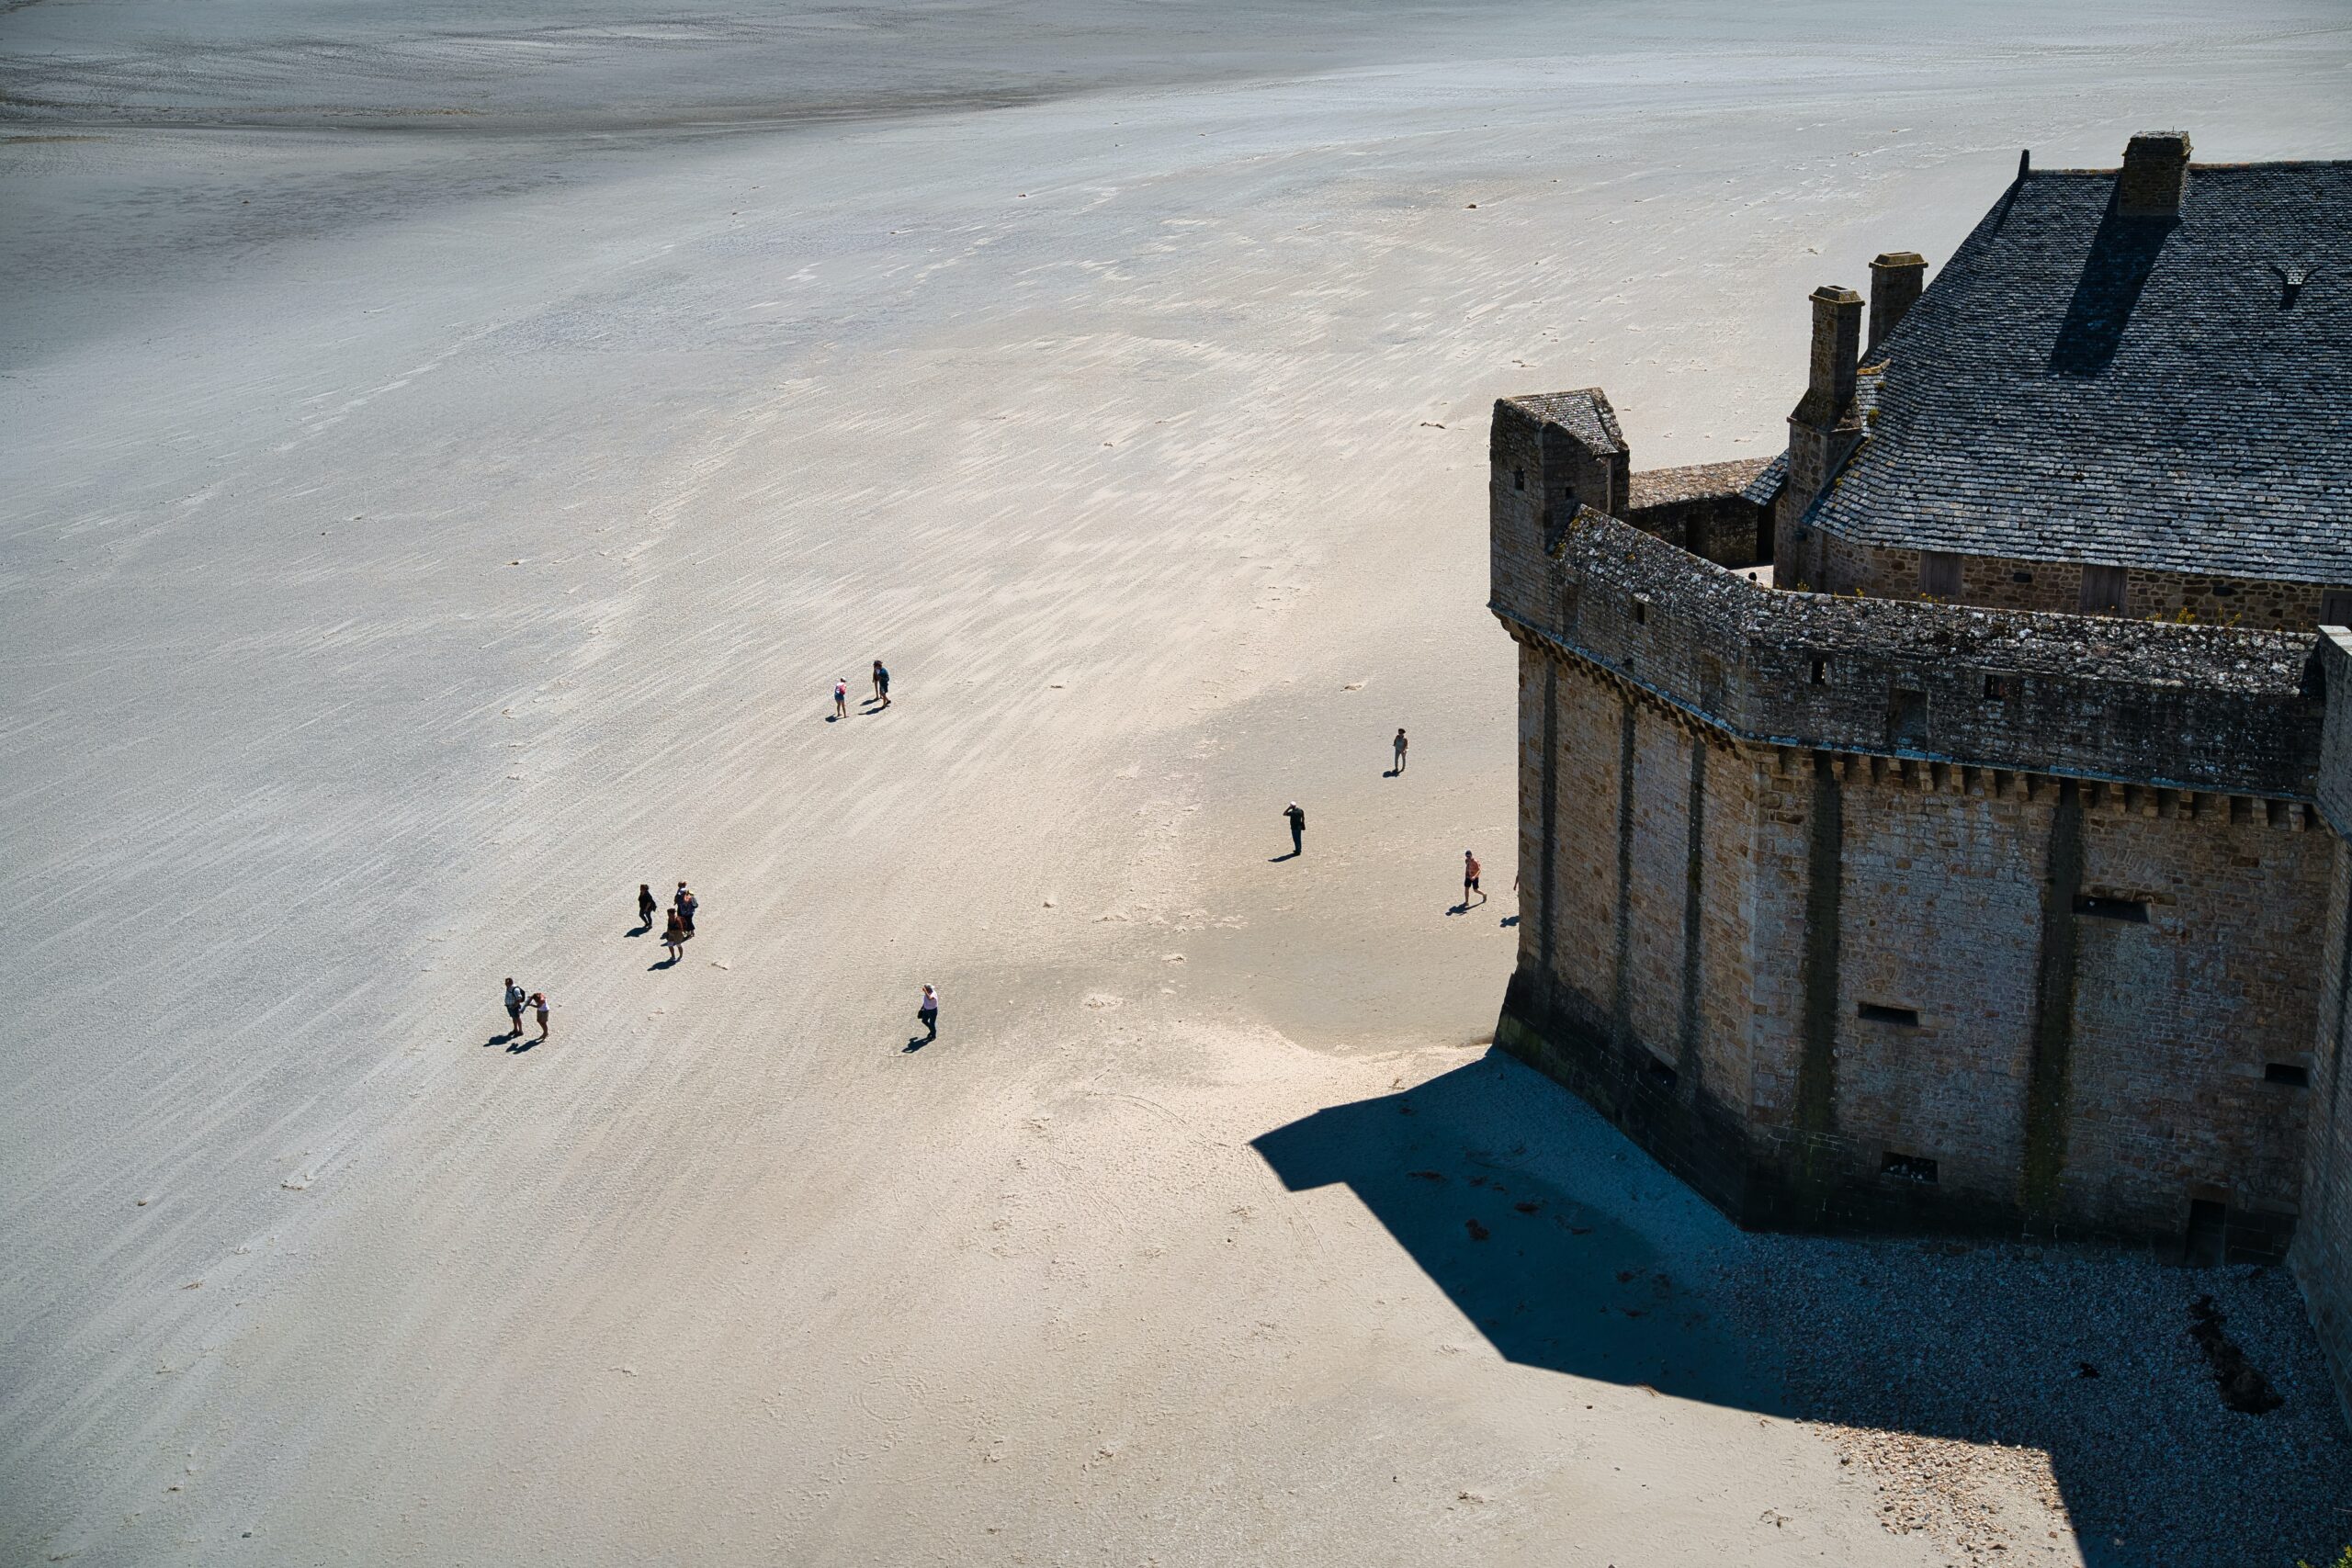 Mont-Saint-Michel is a stunning tourist destination in Normandy.
Pictured: Mont-Saint-Michel during low tide with people exploring the sandbanks seemingly on a walking tour 